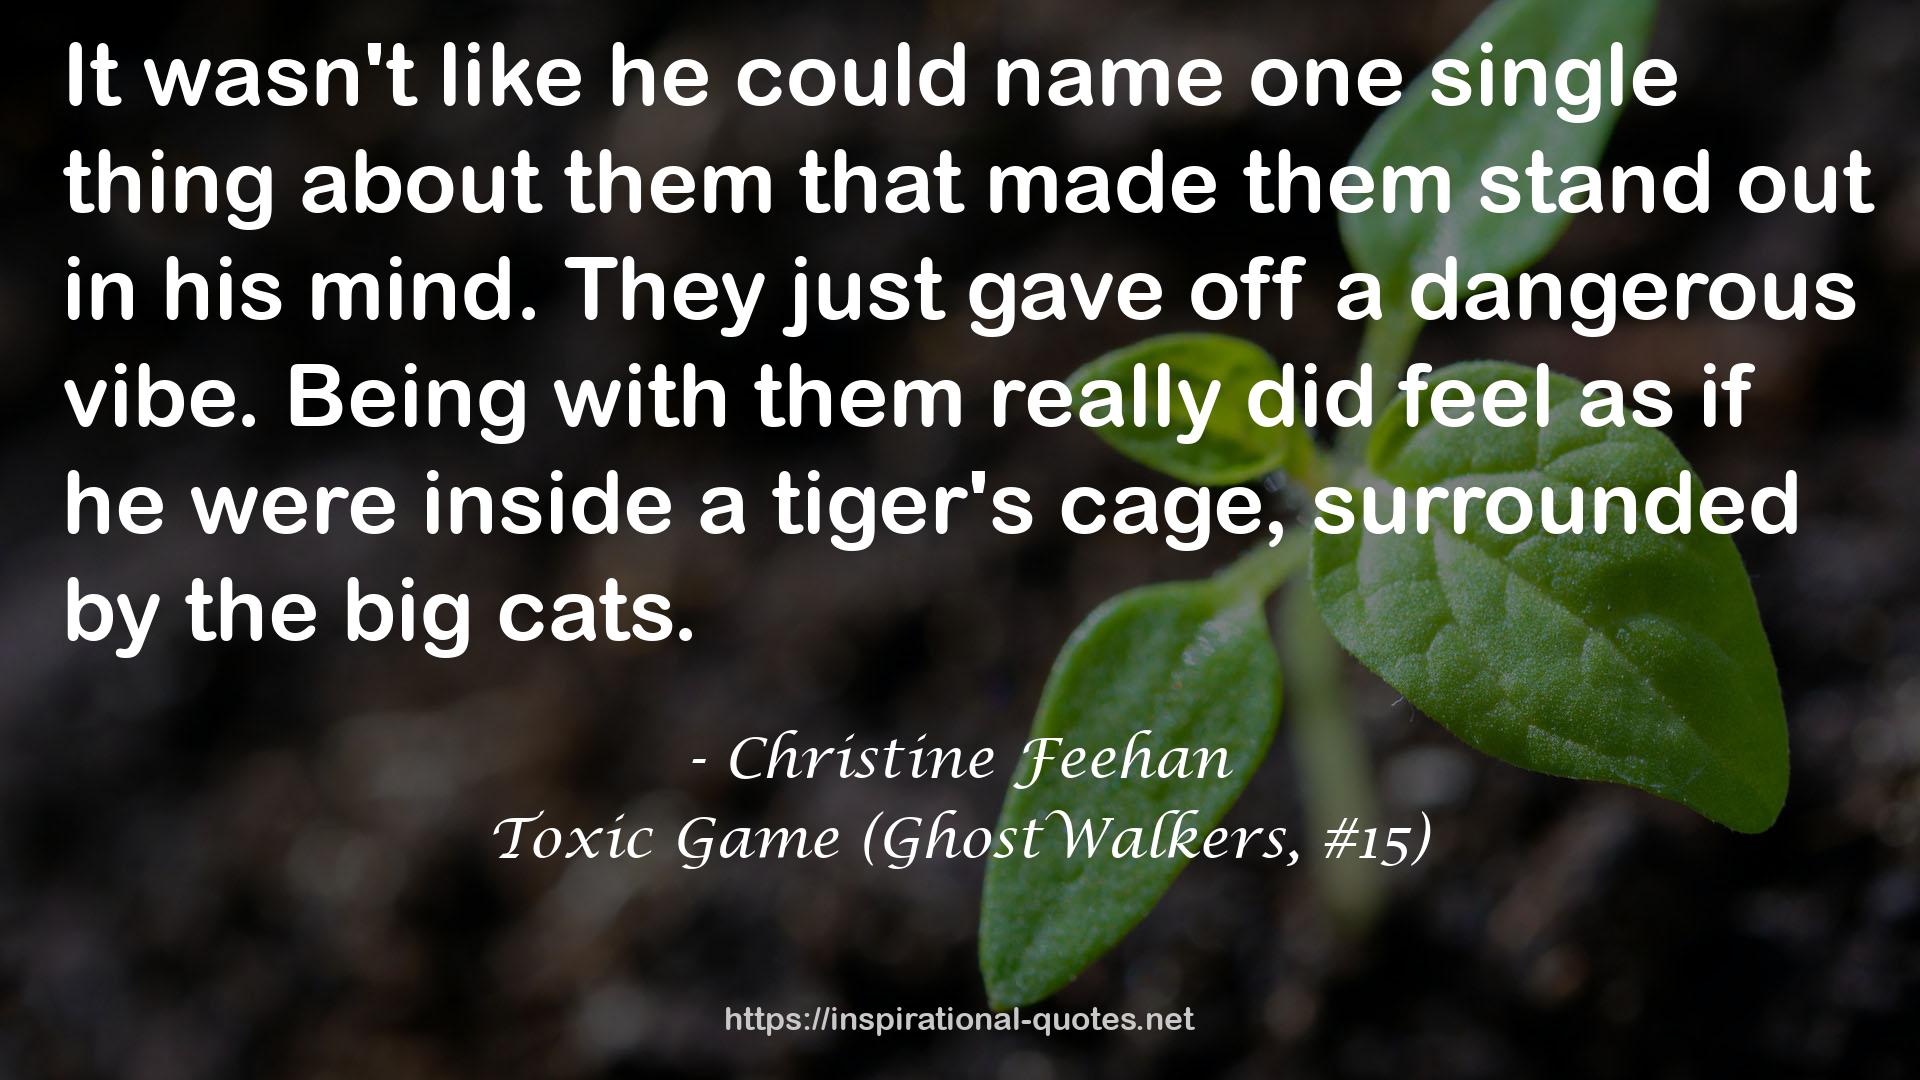 Toxic Game (GhostWalkers, #15) QUOTES